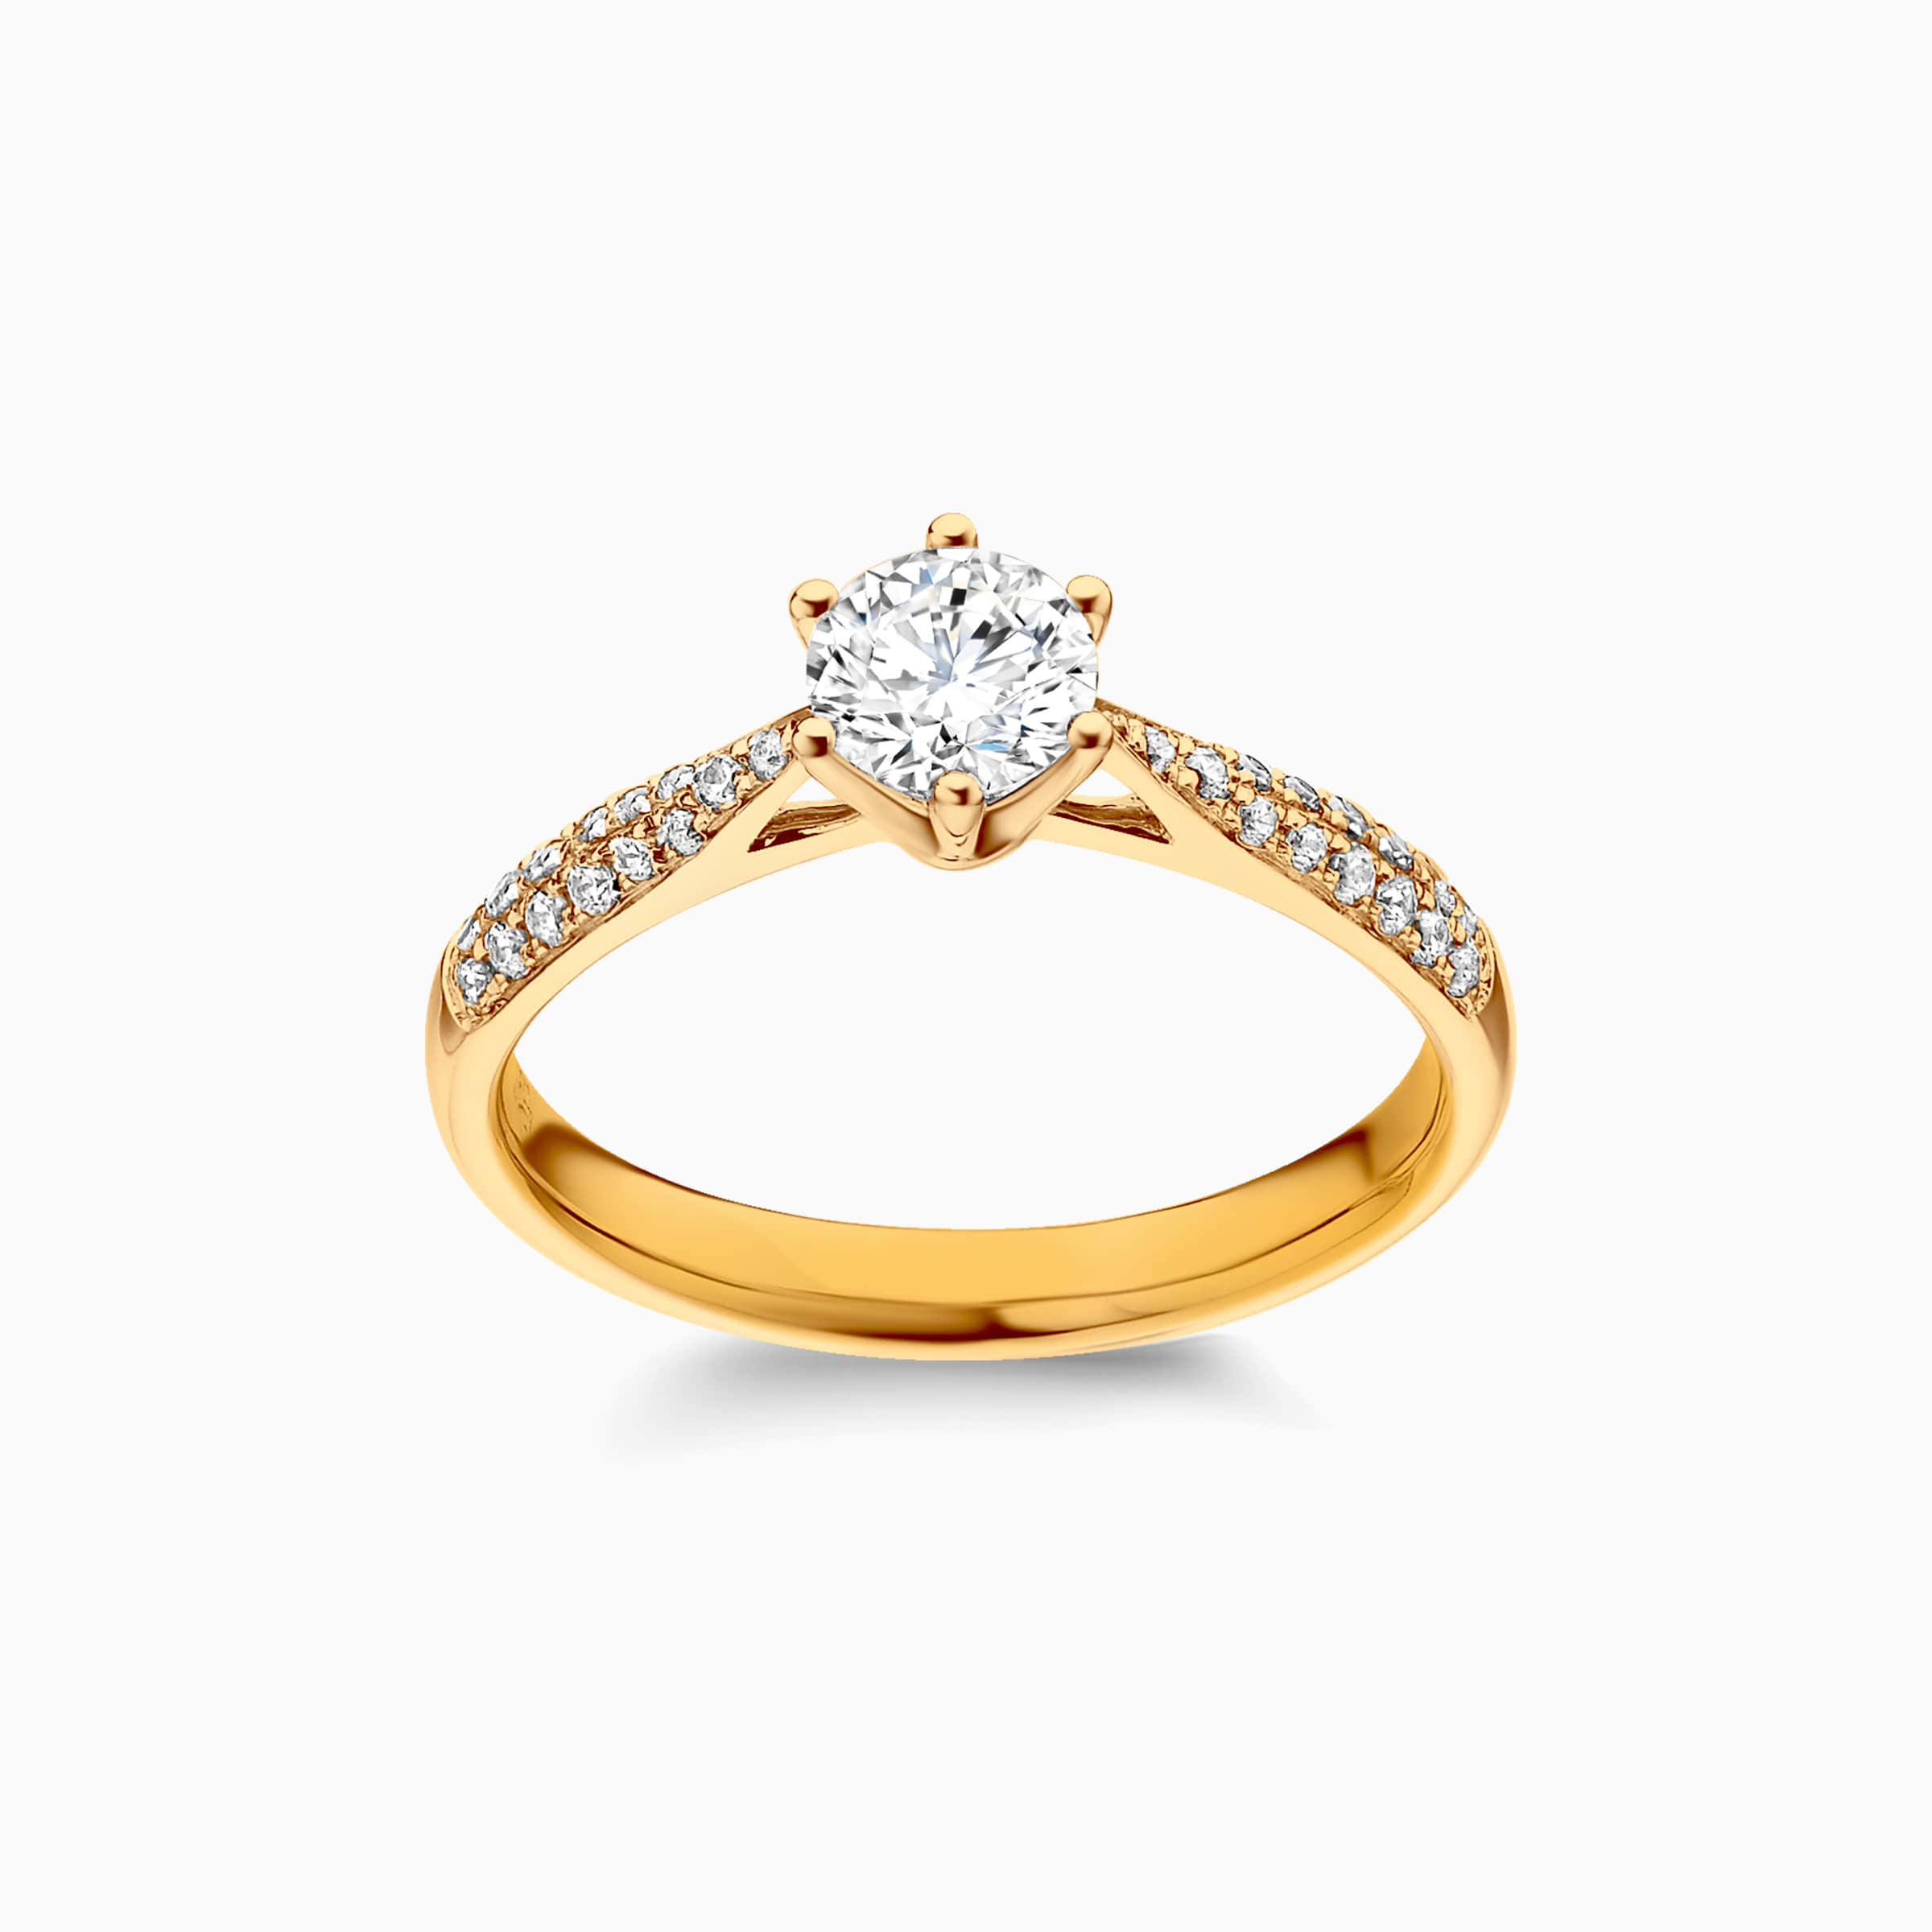 Darry Ring diamond band engagement ring in yellow gold